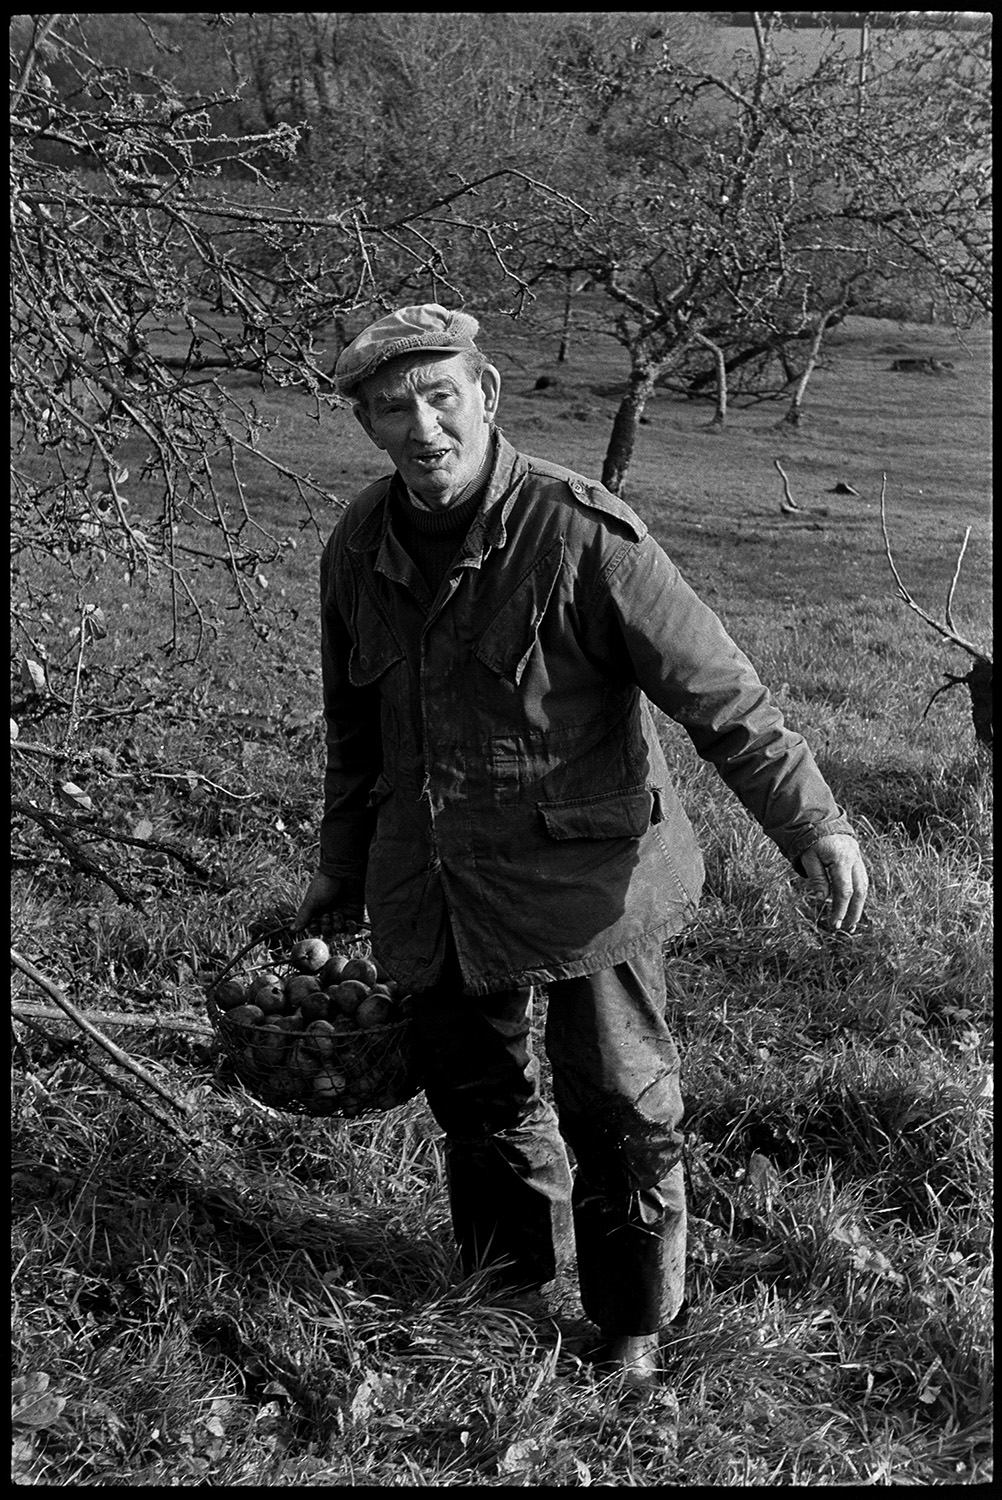 Cider orchard, men picking up apples and bagging them up. Fallen apple tree.
[Bill Lott carrying a basket of apples in the cider orchard at Westpark, Iddesleigh.]